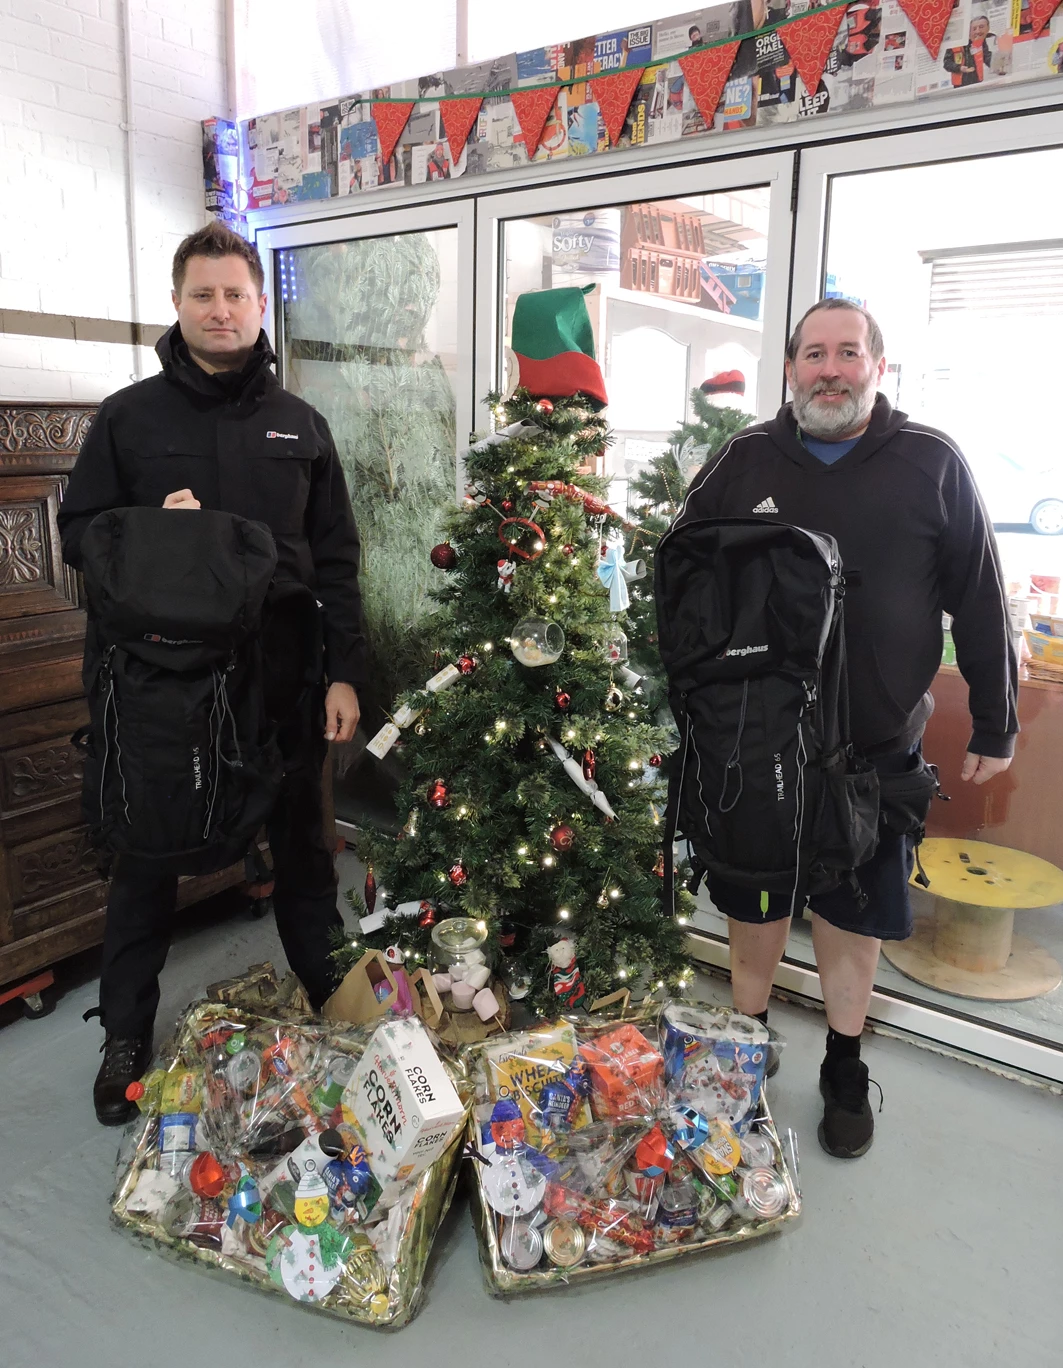 George Clarke (left) and Brian Burridge of North East Homeless with Berghaus rucksacks that will be used by charity volunteers over Christmas